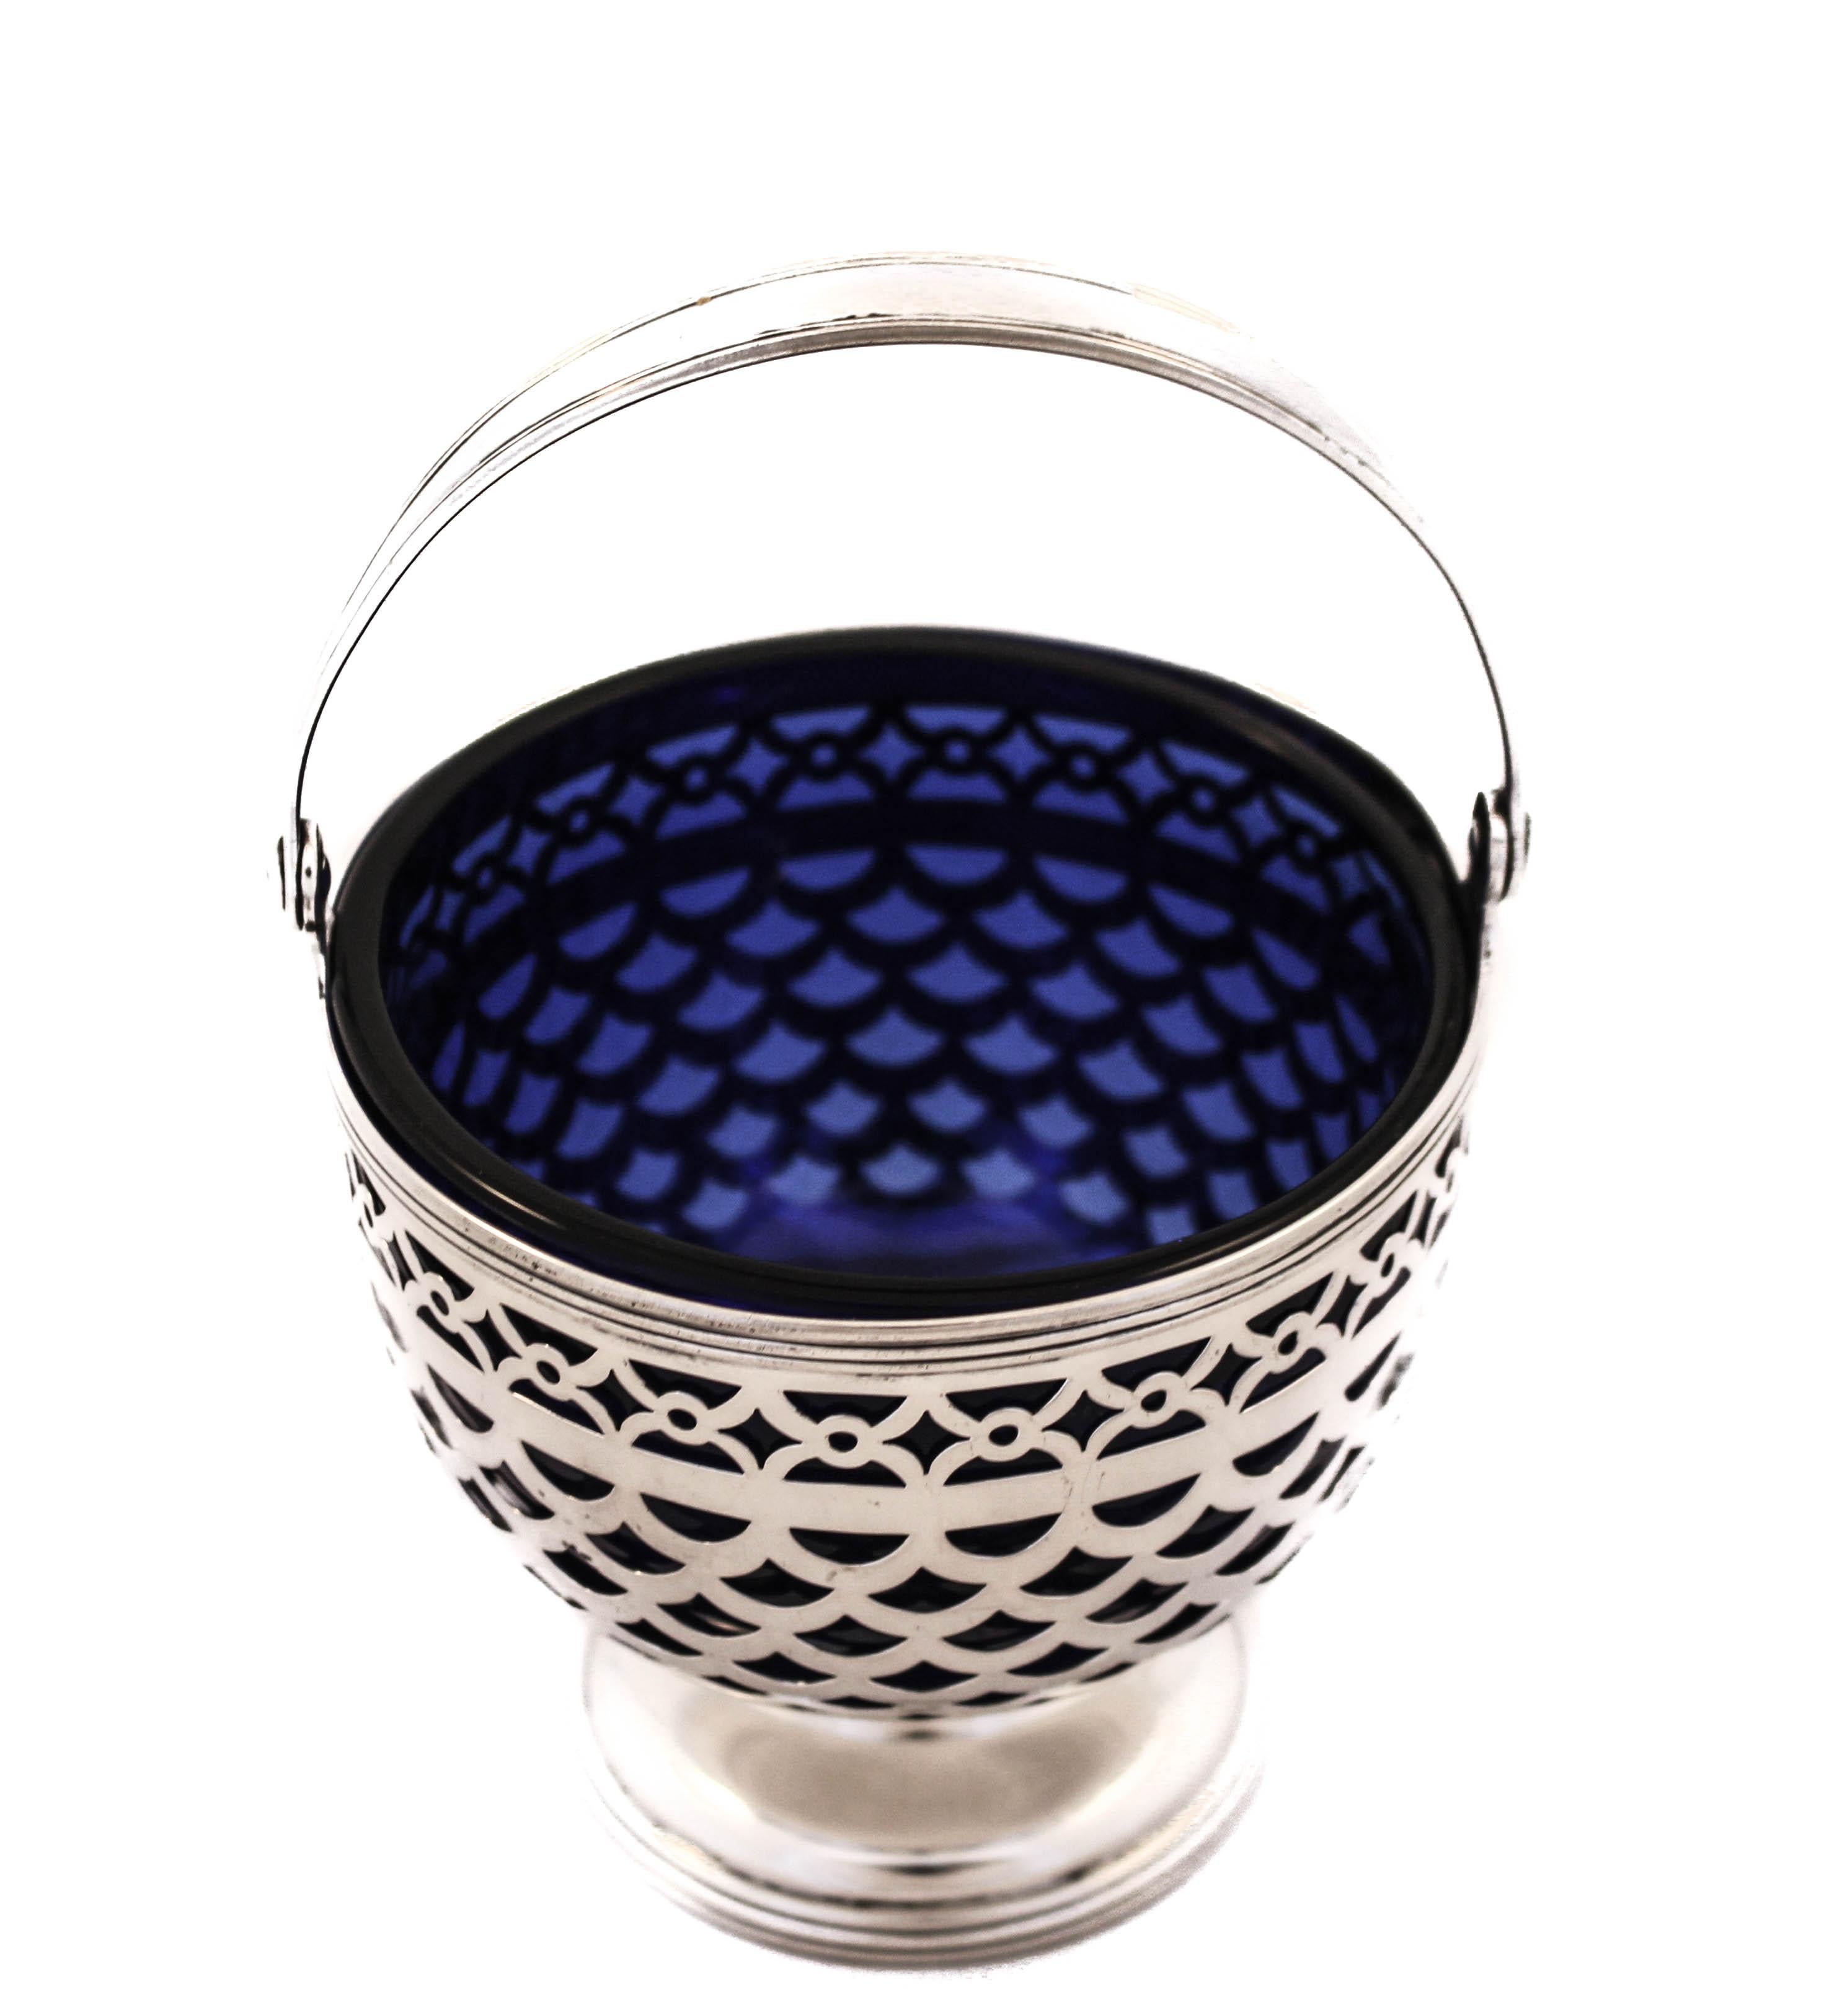 We are proud you this sterling silver bonbon basket with a cobalt glass liner by the world renowned Tiffany and Company. It has a beautiful symmetrical open-work design that allows the cobalt glass to shine through. There is a pedestal in the center